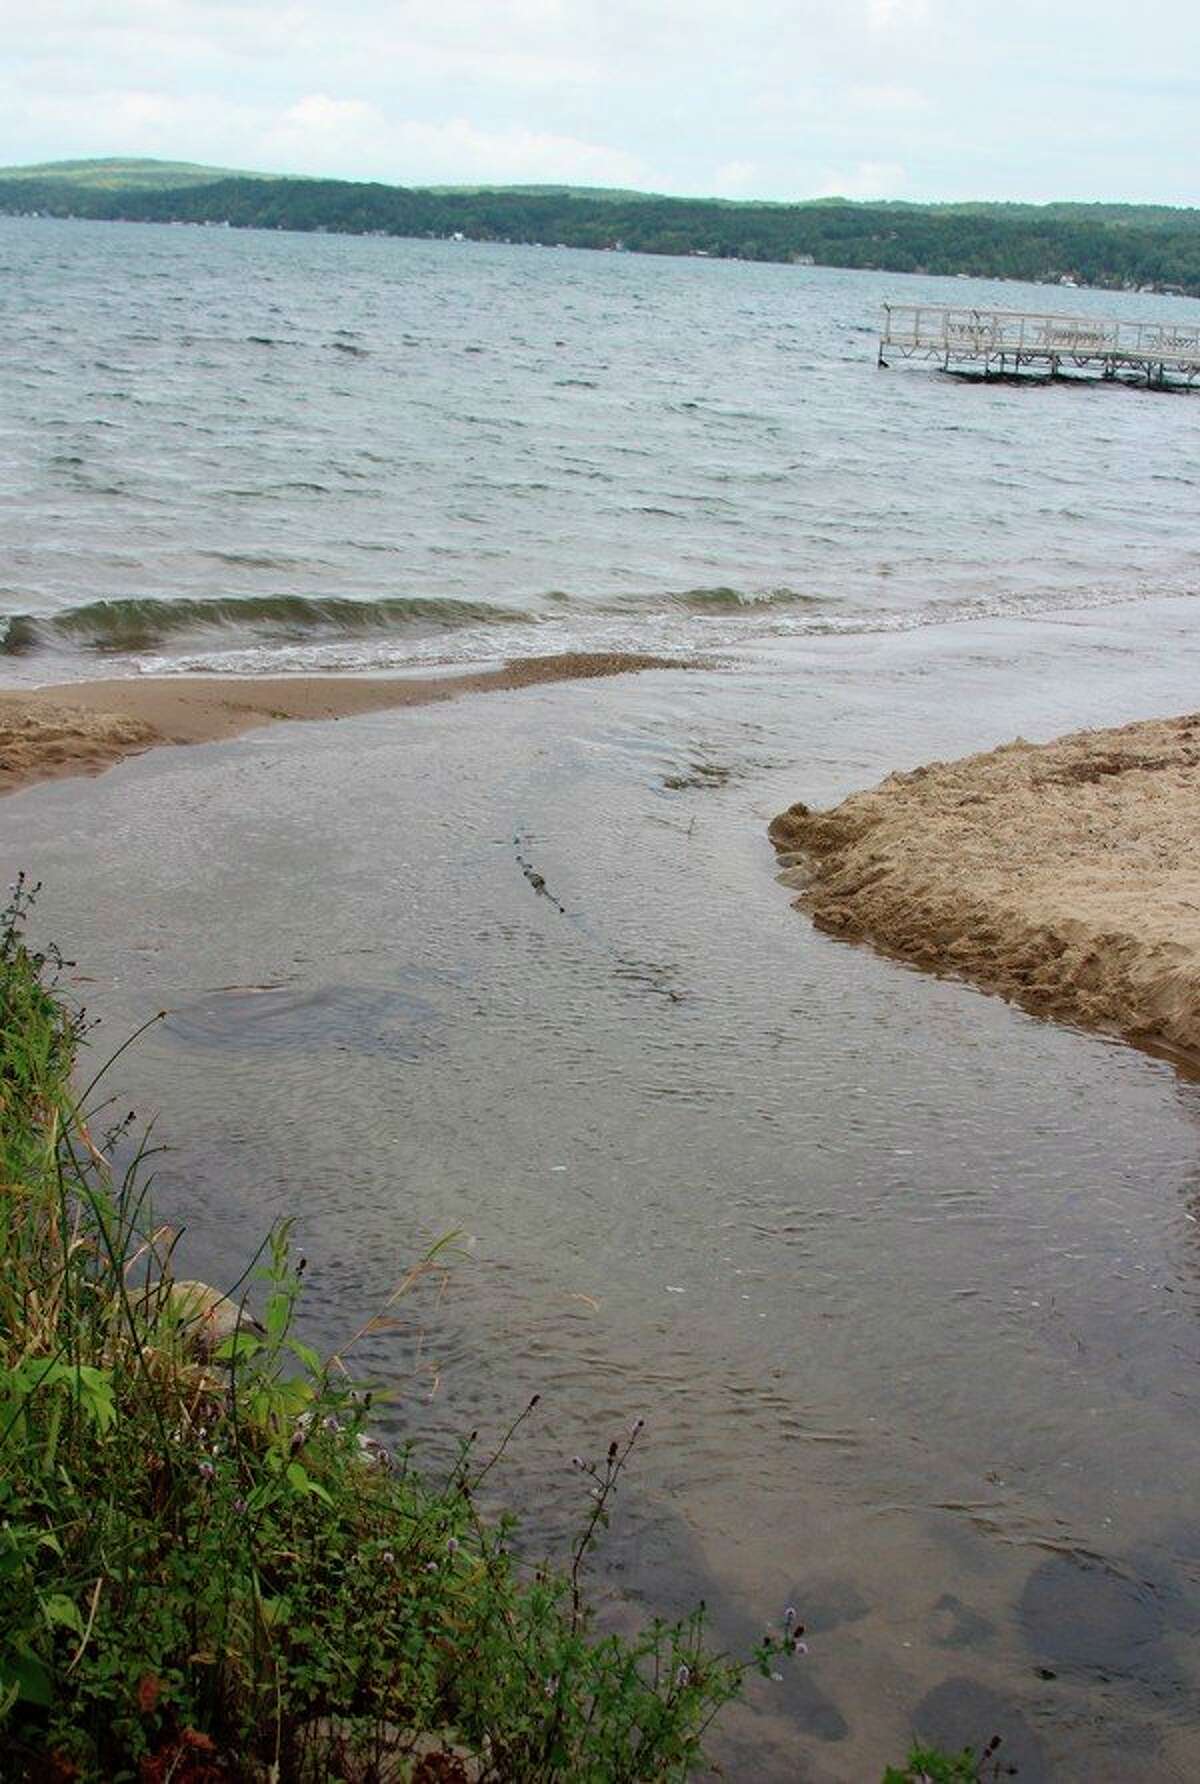 The Village of Beulah is working with the county and the Benzie Conservation District to keep e.coli from running out of the Cold Creek and into Crystal Lake during storm events. (File photo)